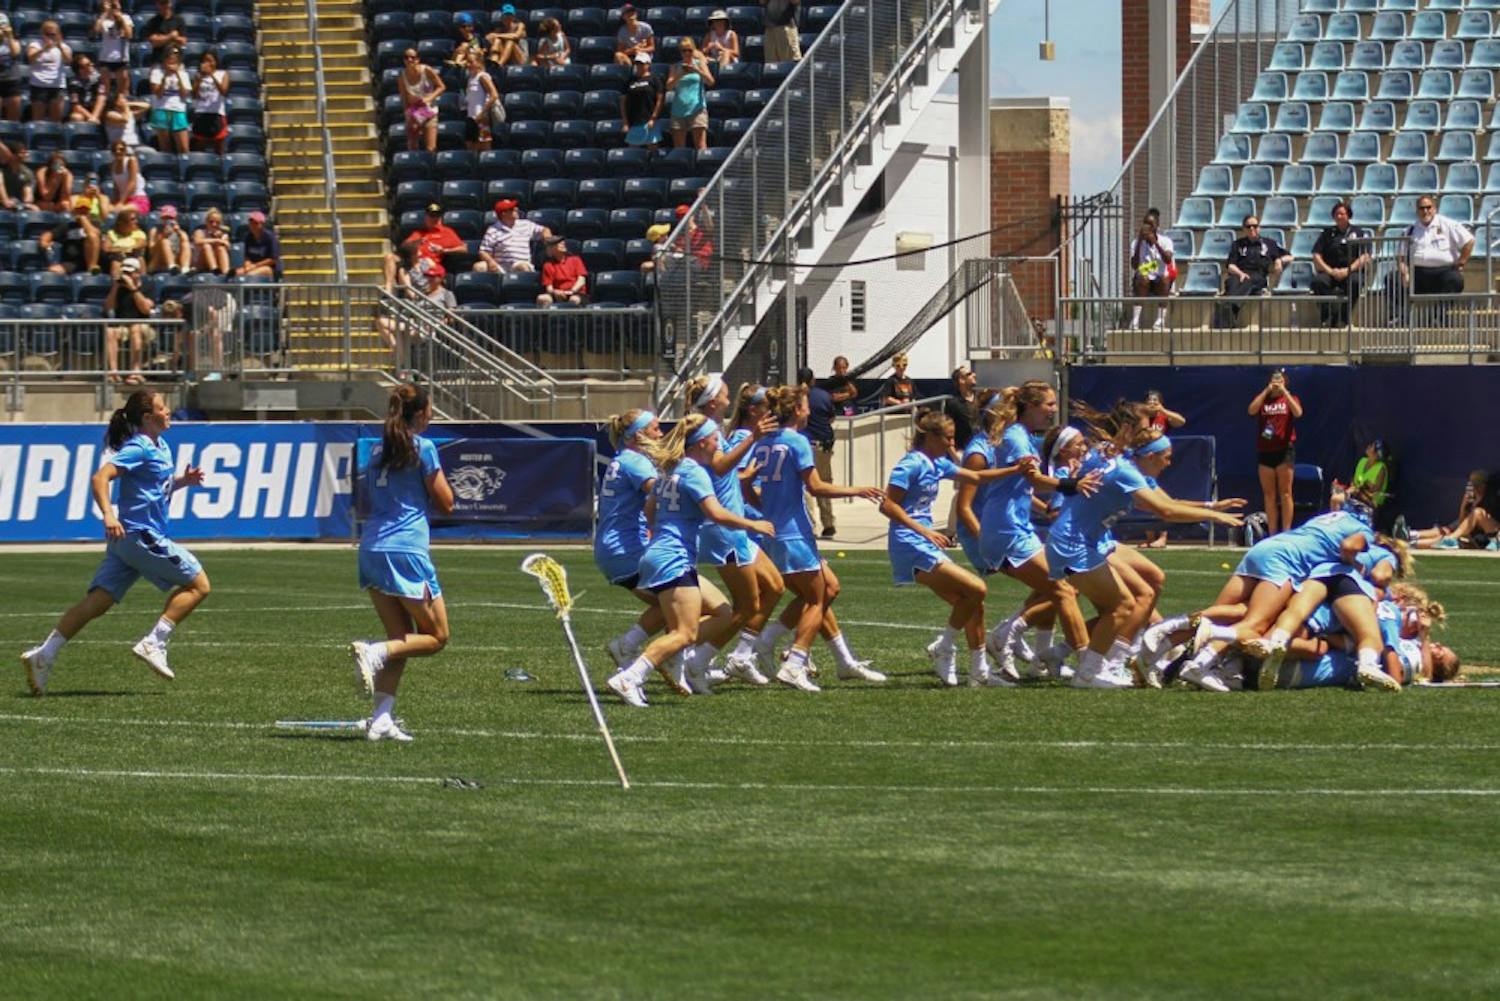 The North Carolina women's lacrosse team swarms goalkeeper Megan Ward after&nbsp;defeating Maryland 13-7 to capture the NCAA championship on Sunday at Talen Energy Stadium in Chester, PA.